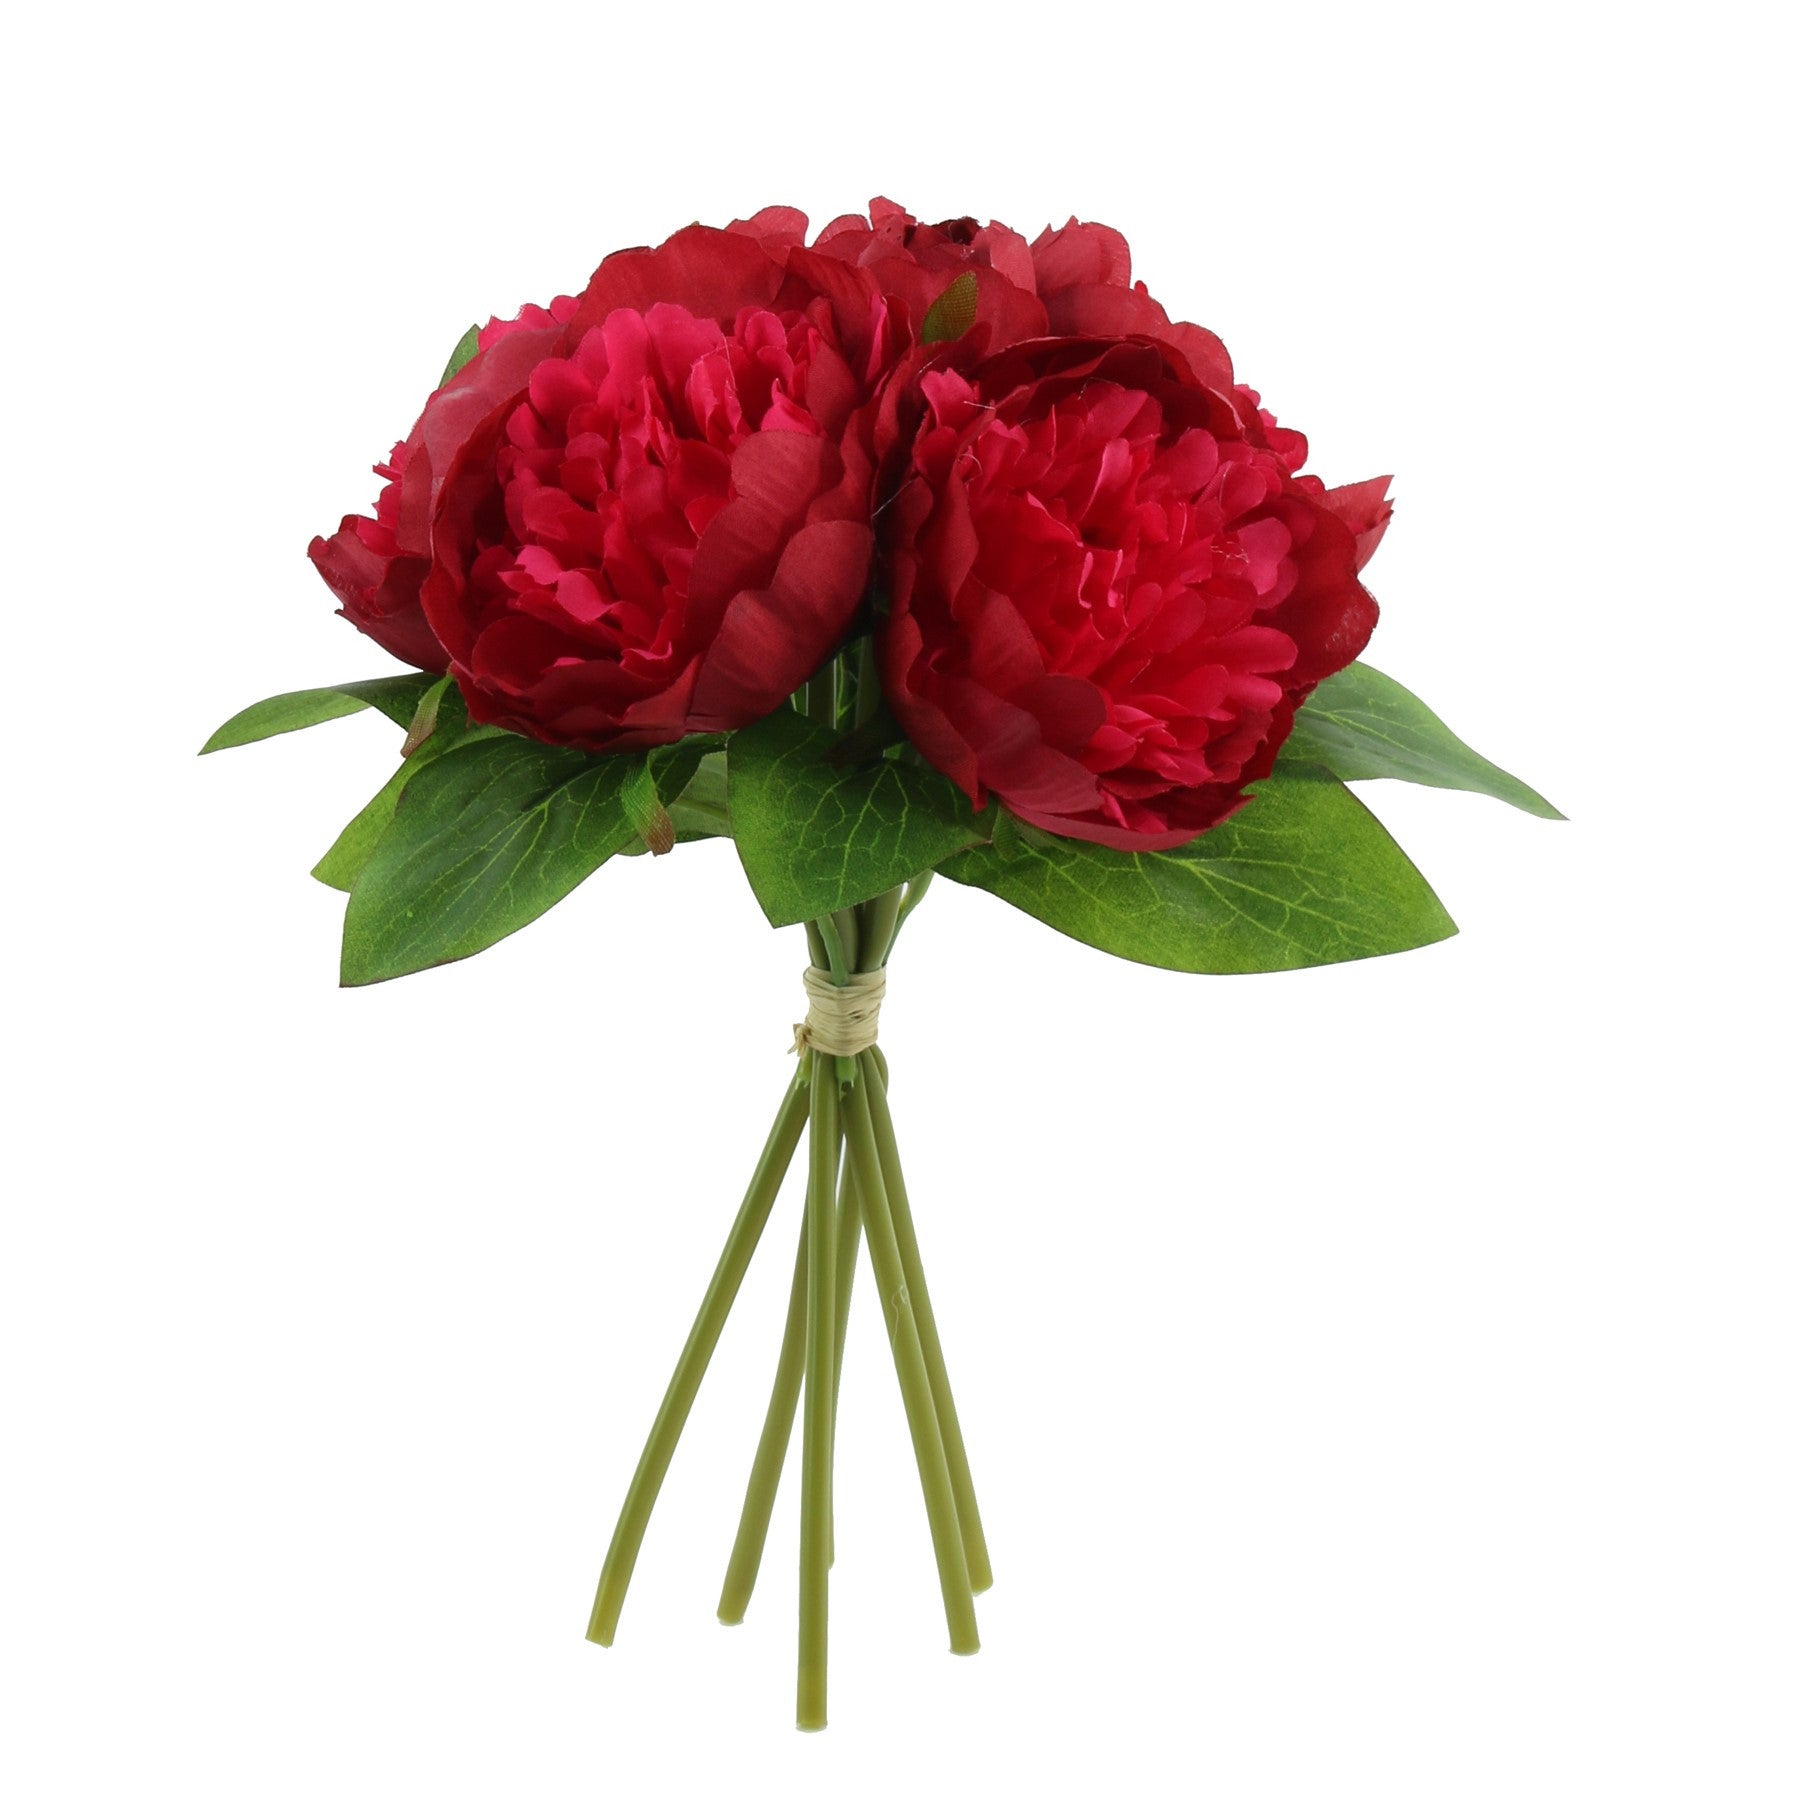 View Red Arundel Peony Bouquet information